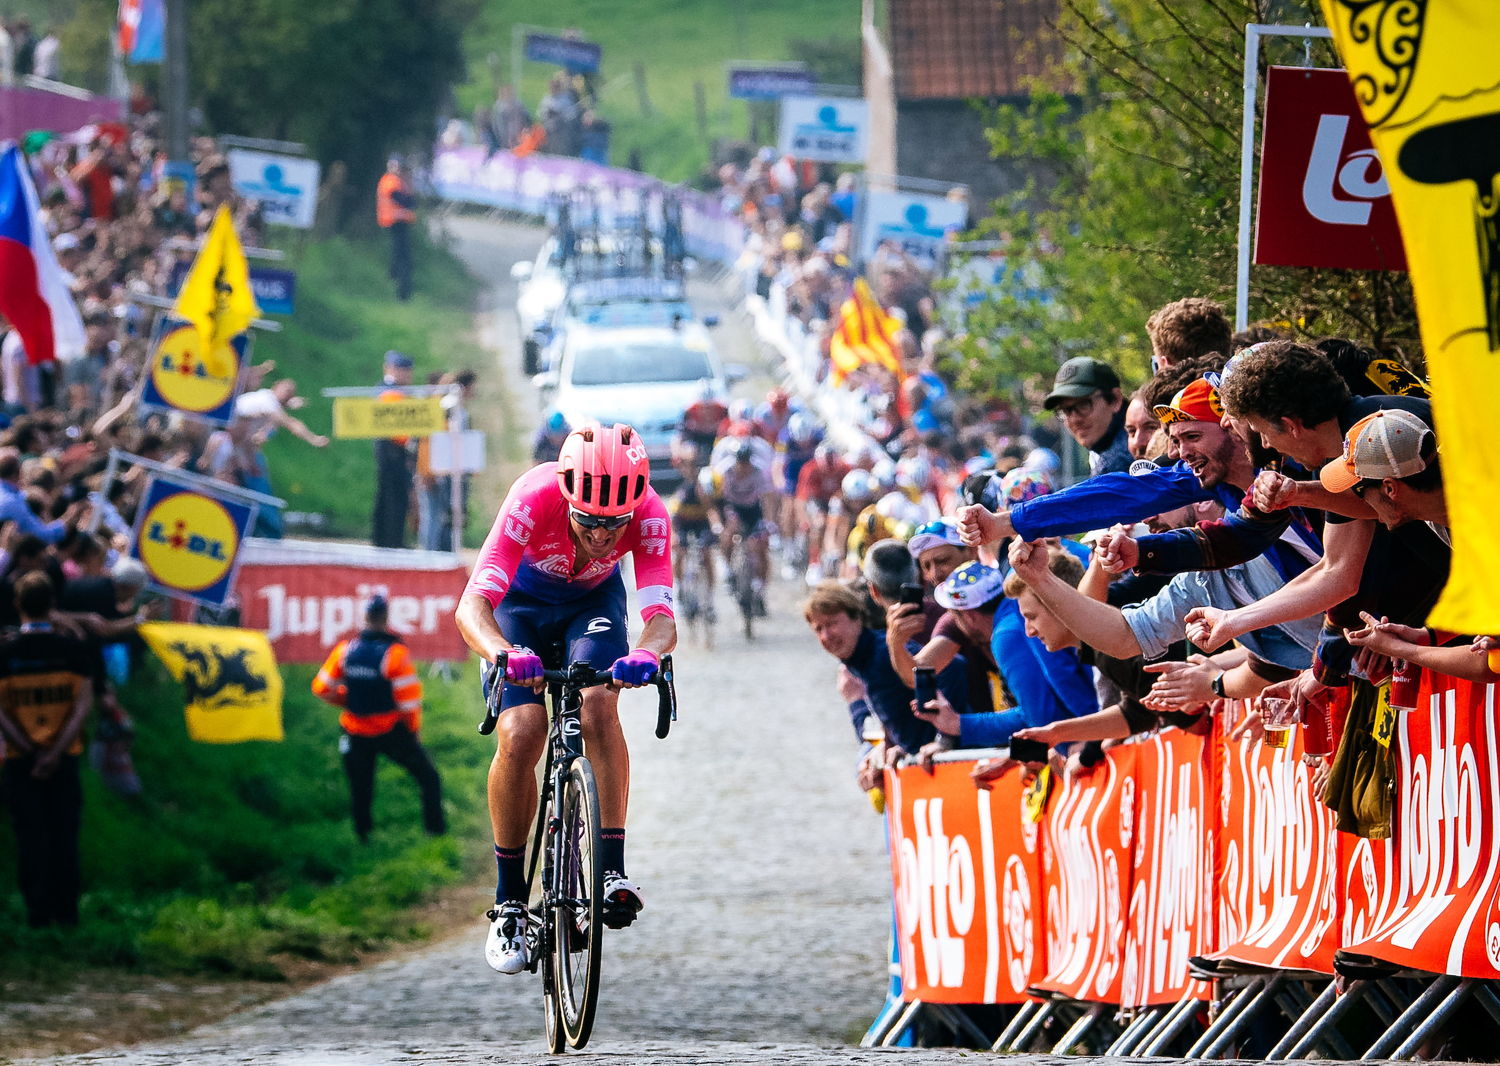 Alberto Bettiol shocks the race world by dropping the lead group on the Olde Kwaremont climb, 15k from the finish.
(photo credit: Grubers)